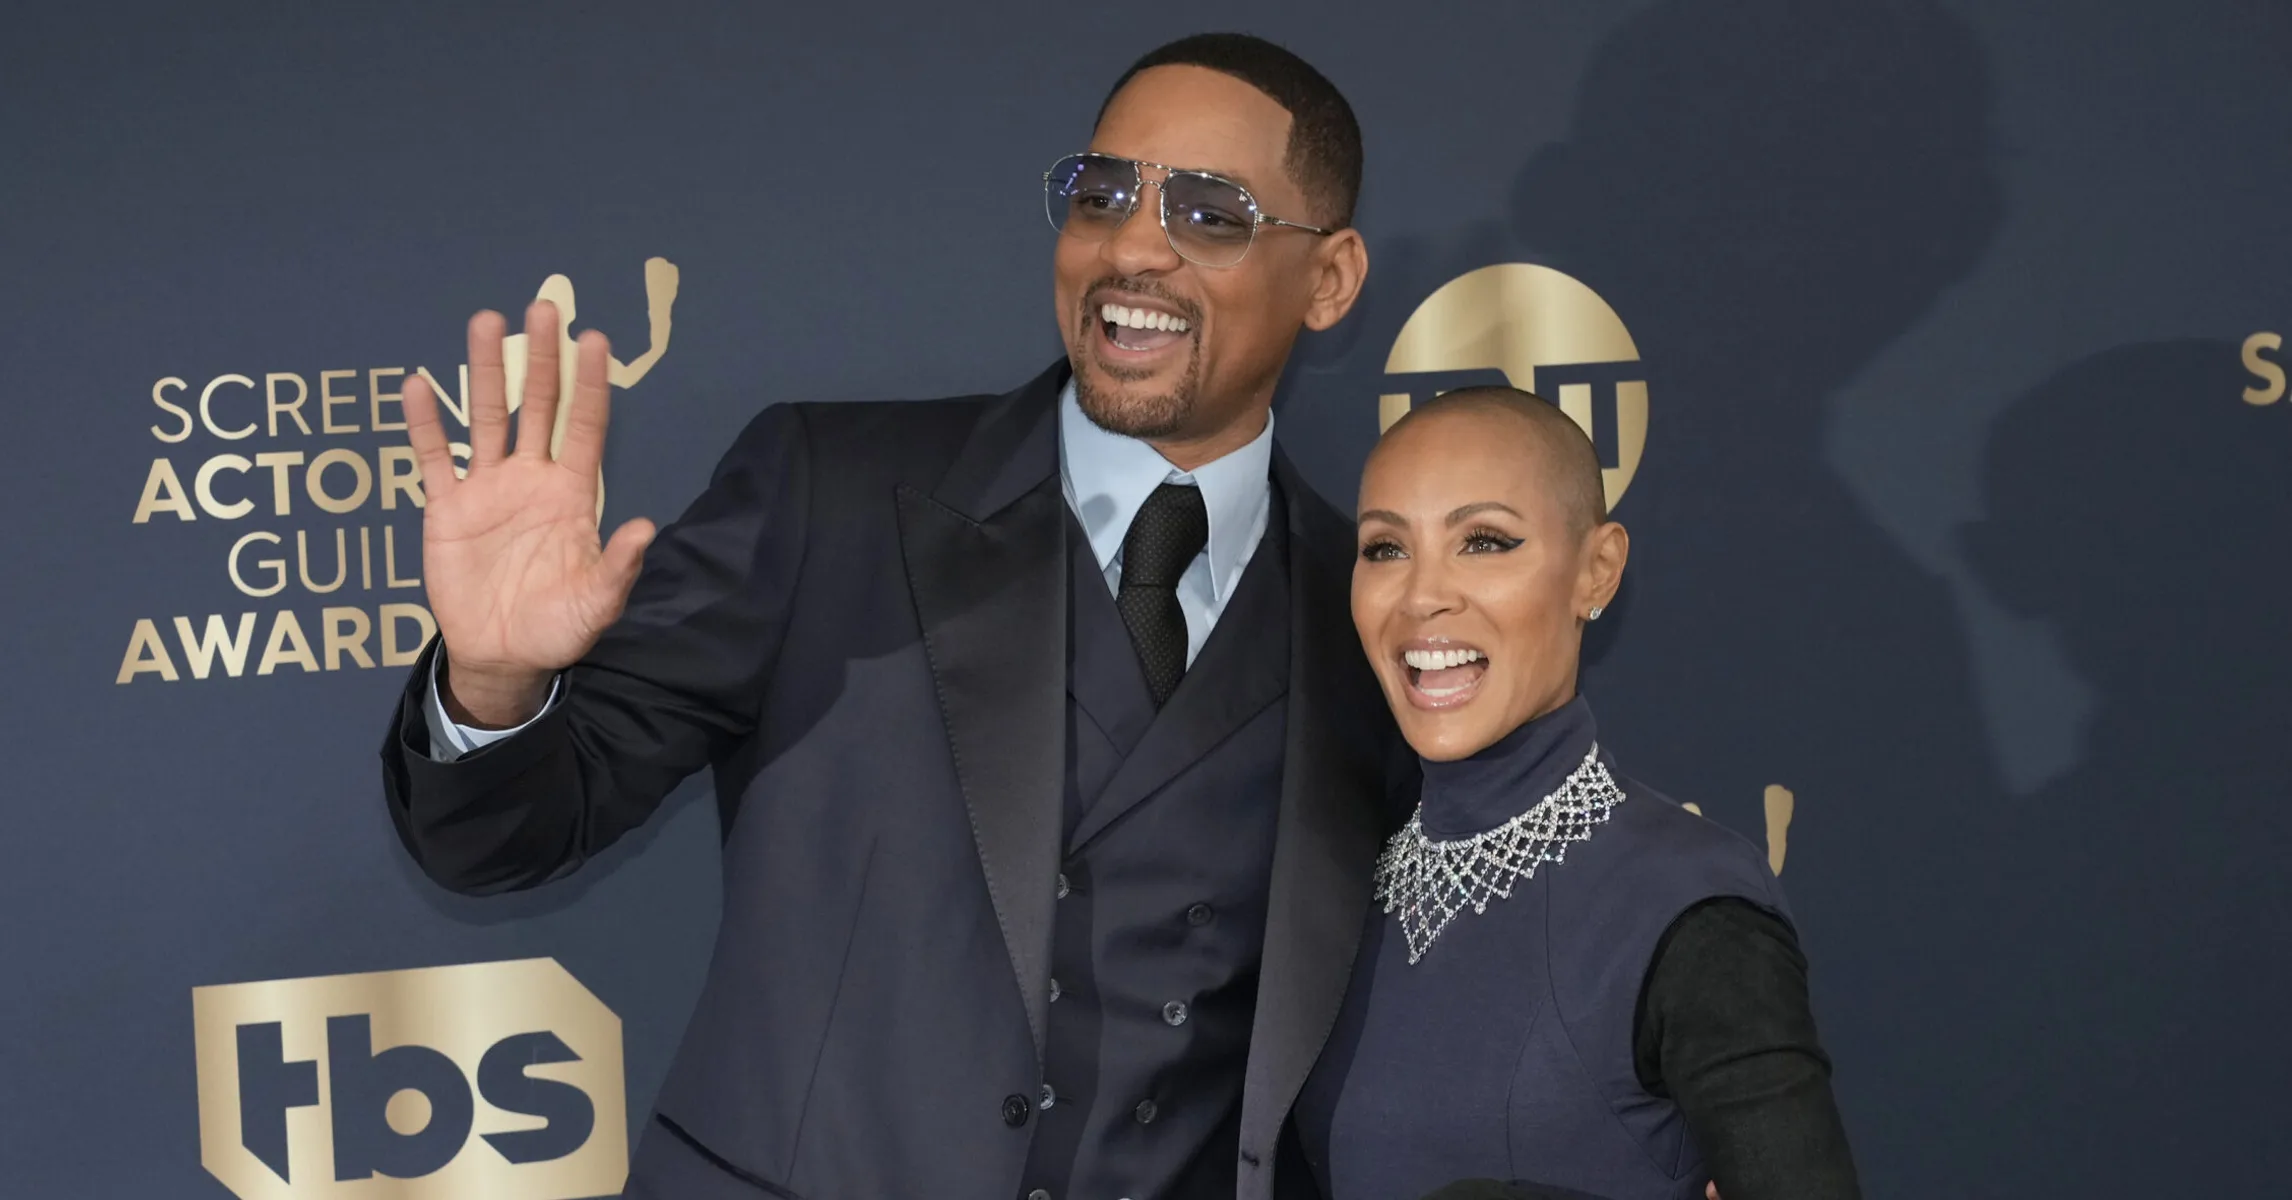 Will And Jada Smith Family Foundation To Close Following Post-Oscars Slap Revenue Decline